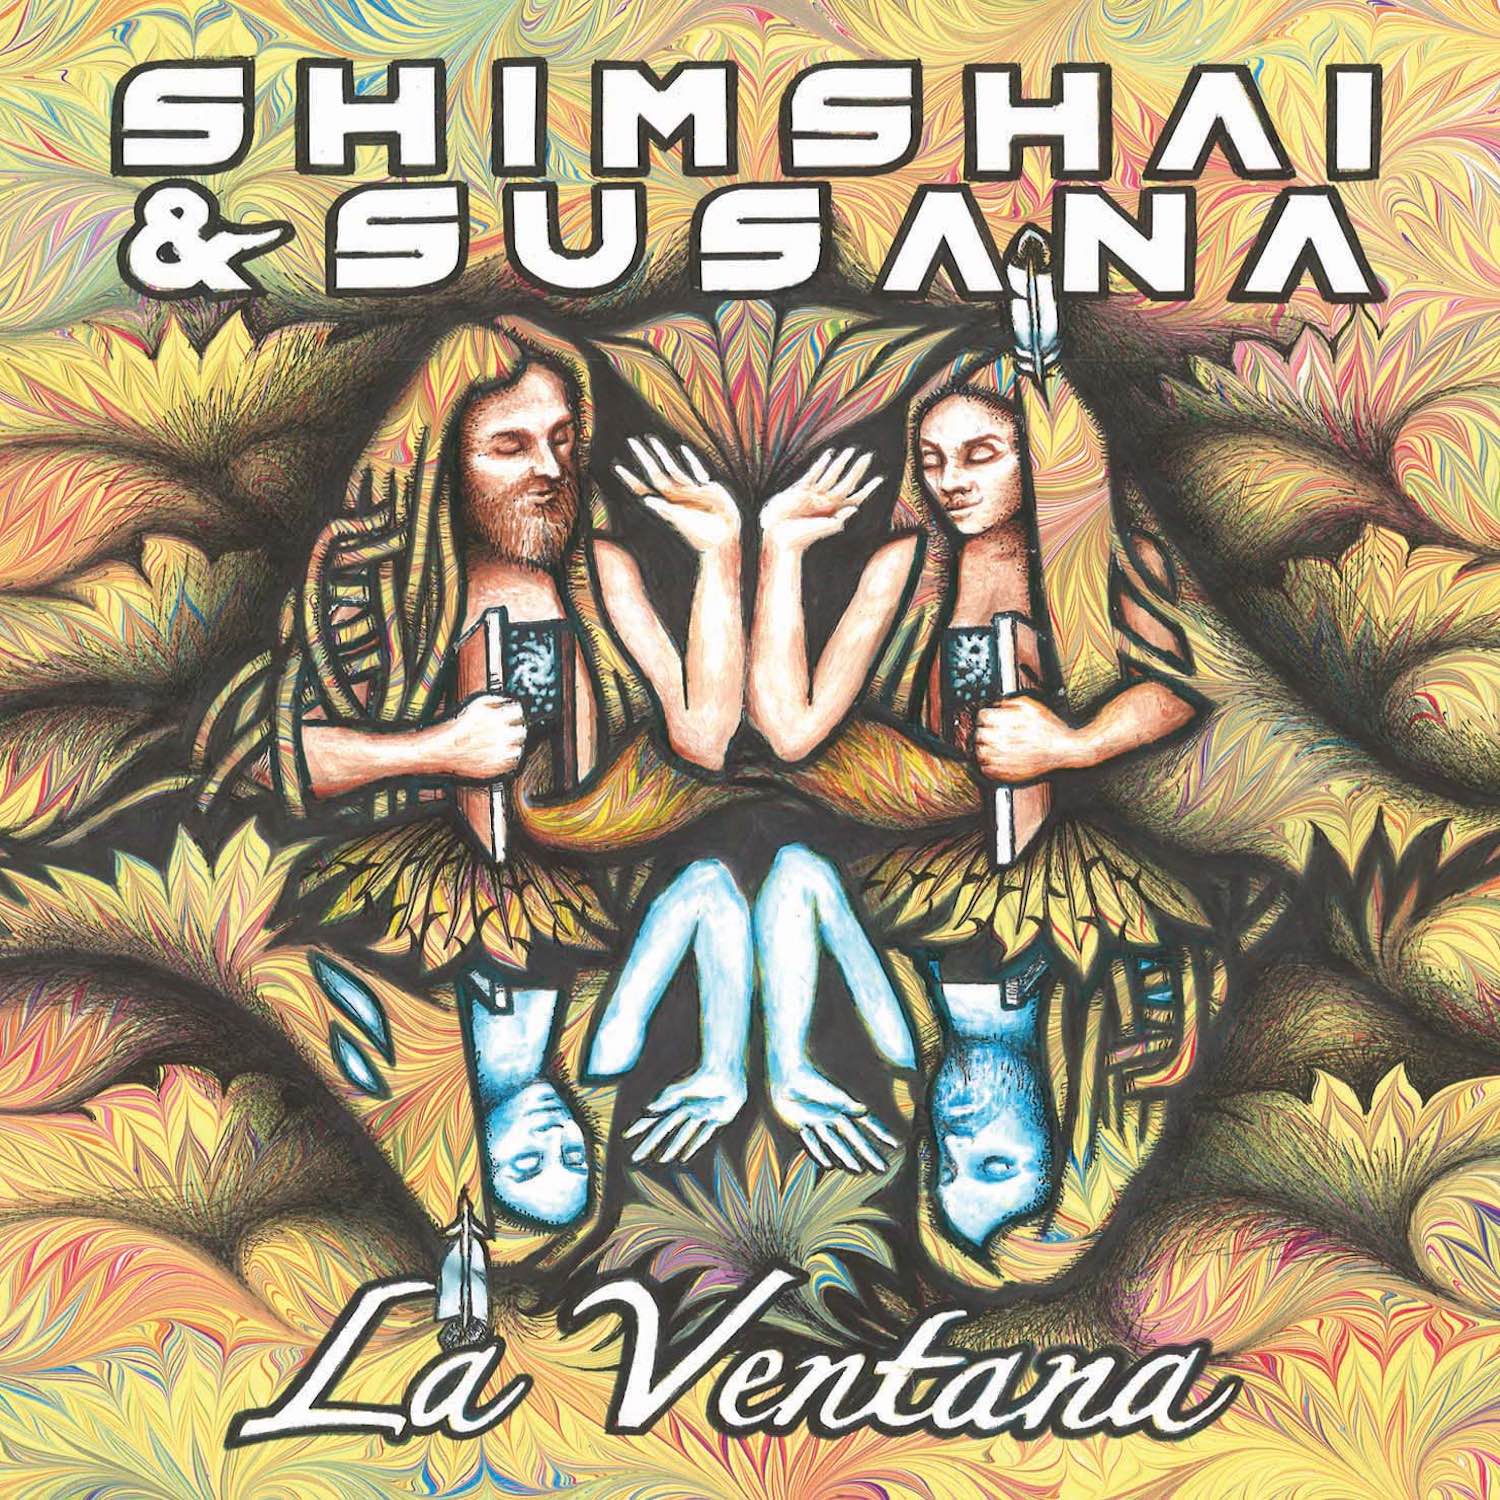 La Ventana, first medicine music album by Shimshai & Susana featuring songs from our maestro Alonso del Rio and other traditional and original compositions of sacred song. 